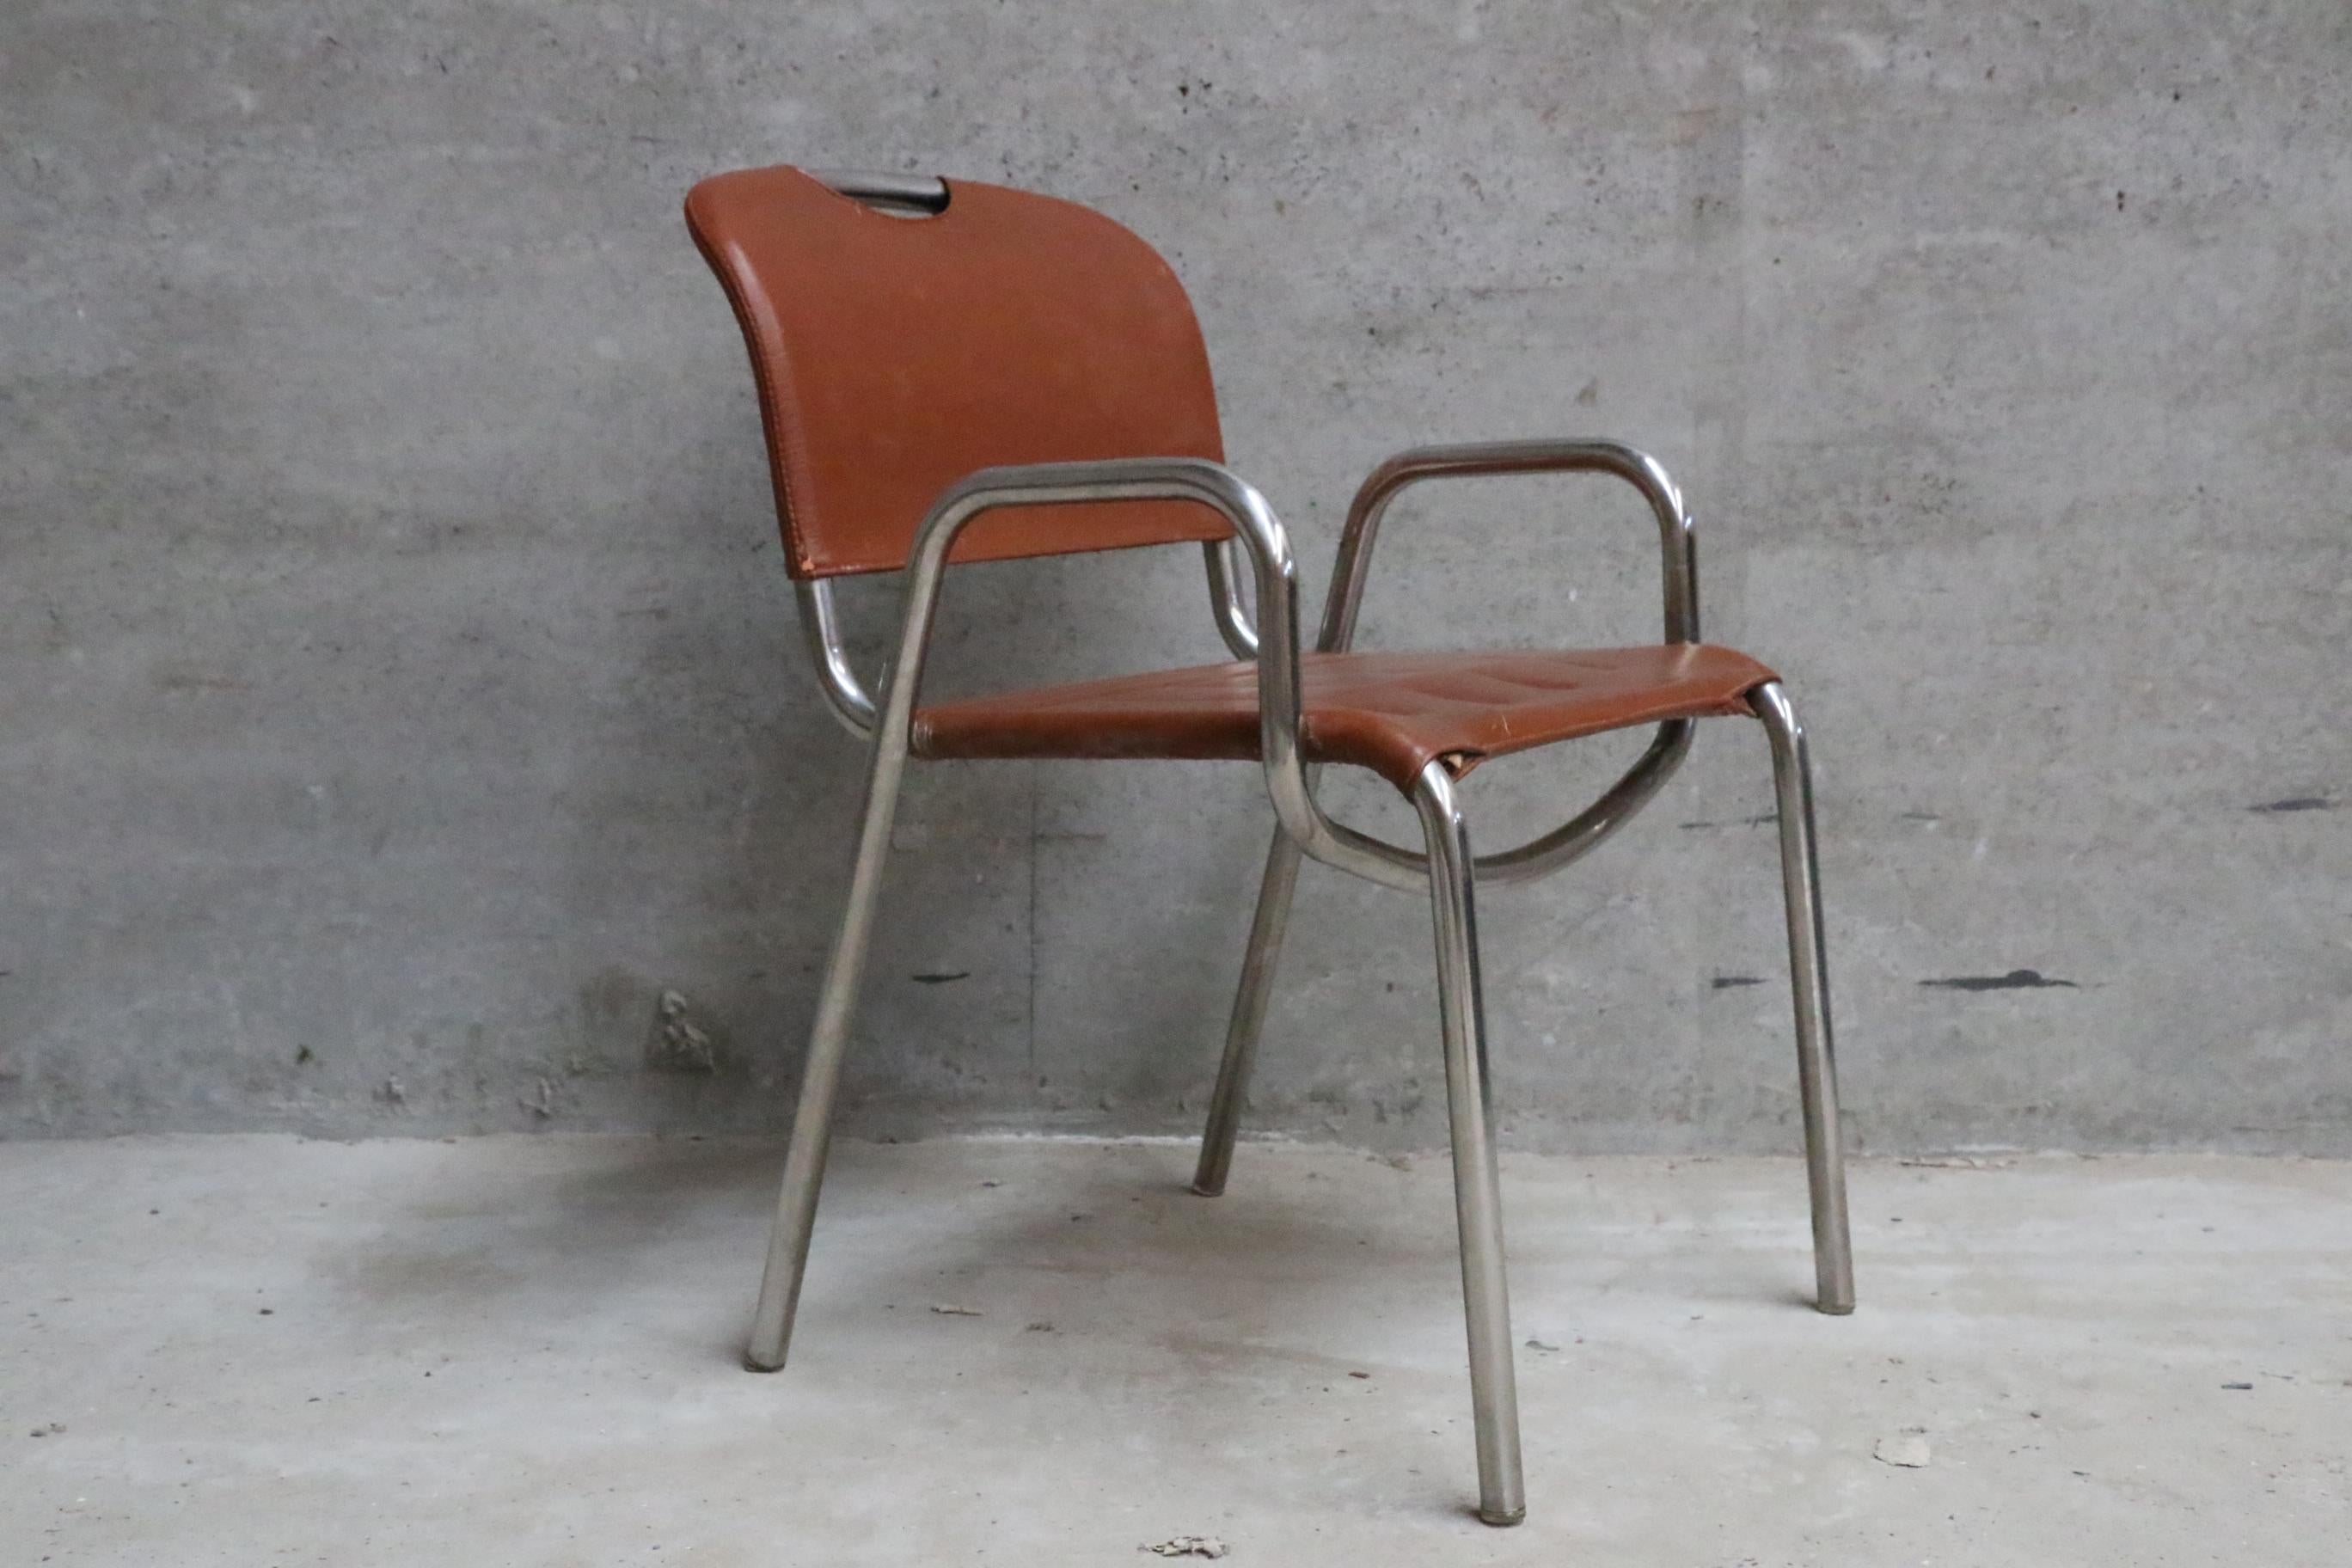 Six chairs designed by Achille Castiglioni/Marcello Minale made by Zanotta, circa 1968
Stackable chair. Stainless steel, seat and back in brown leather.